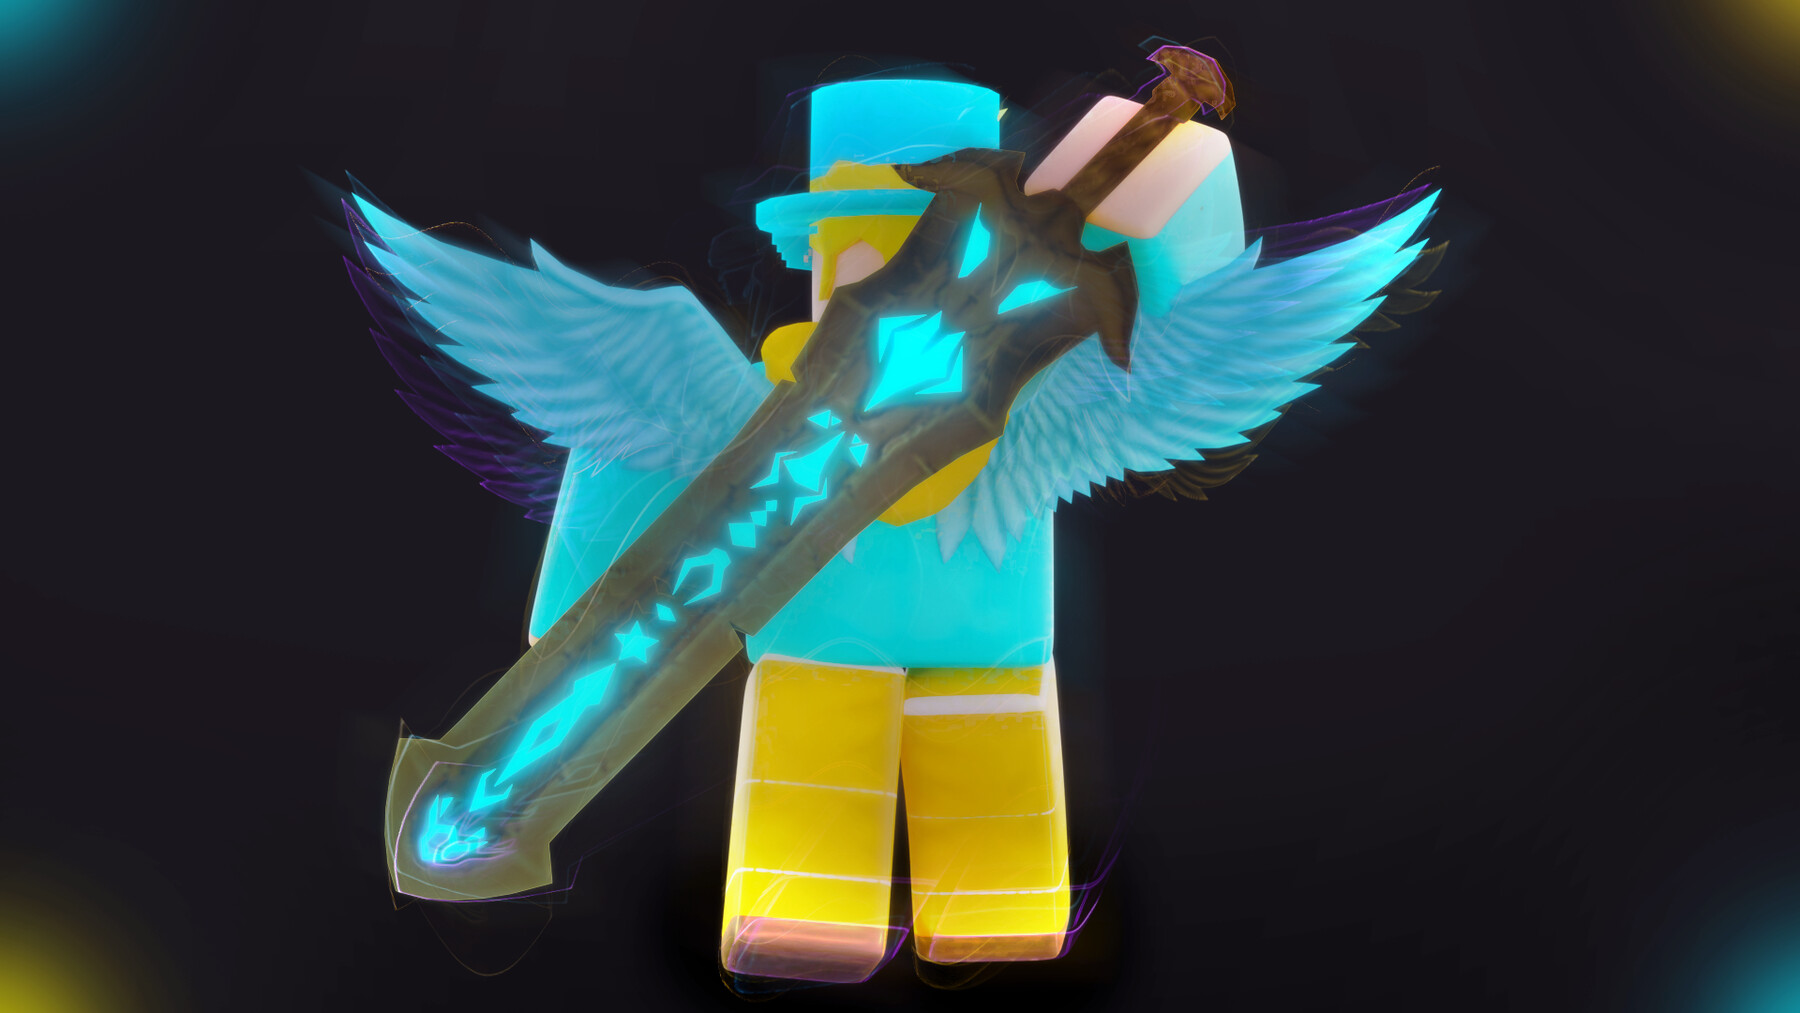 Standard GFX (with background) - Roblox